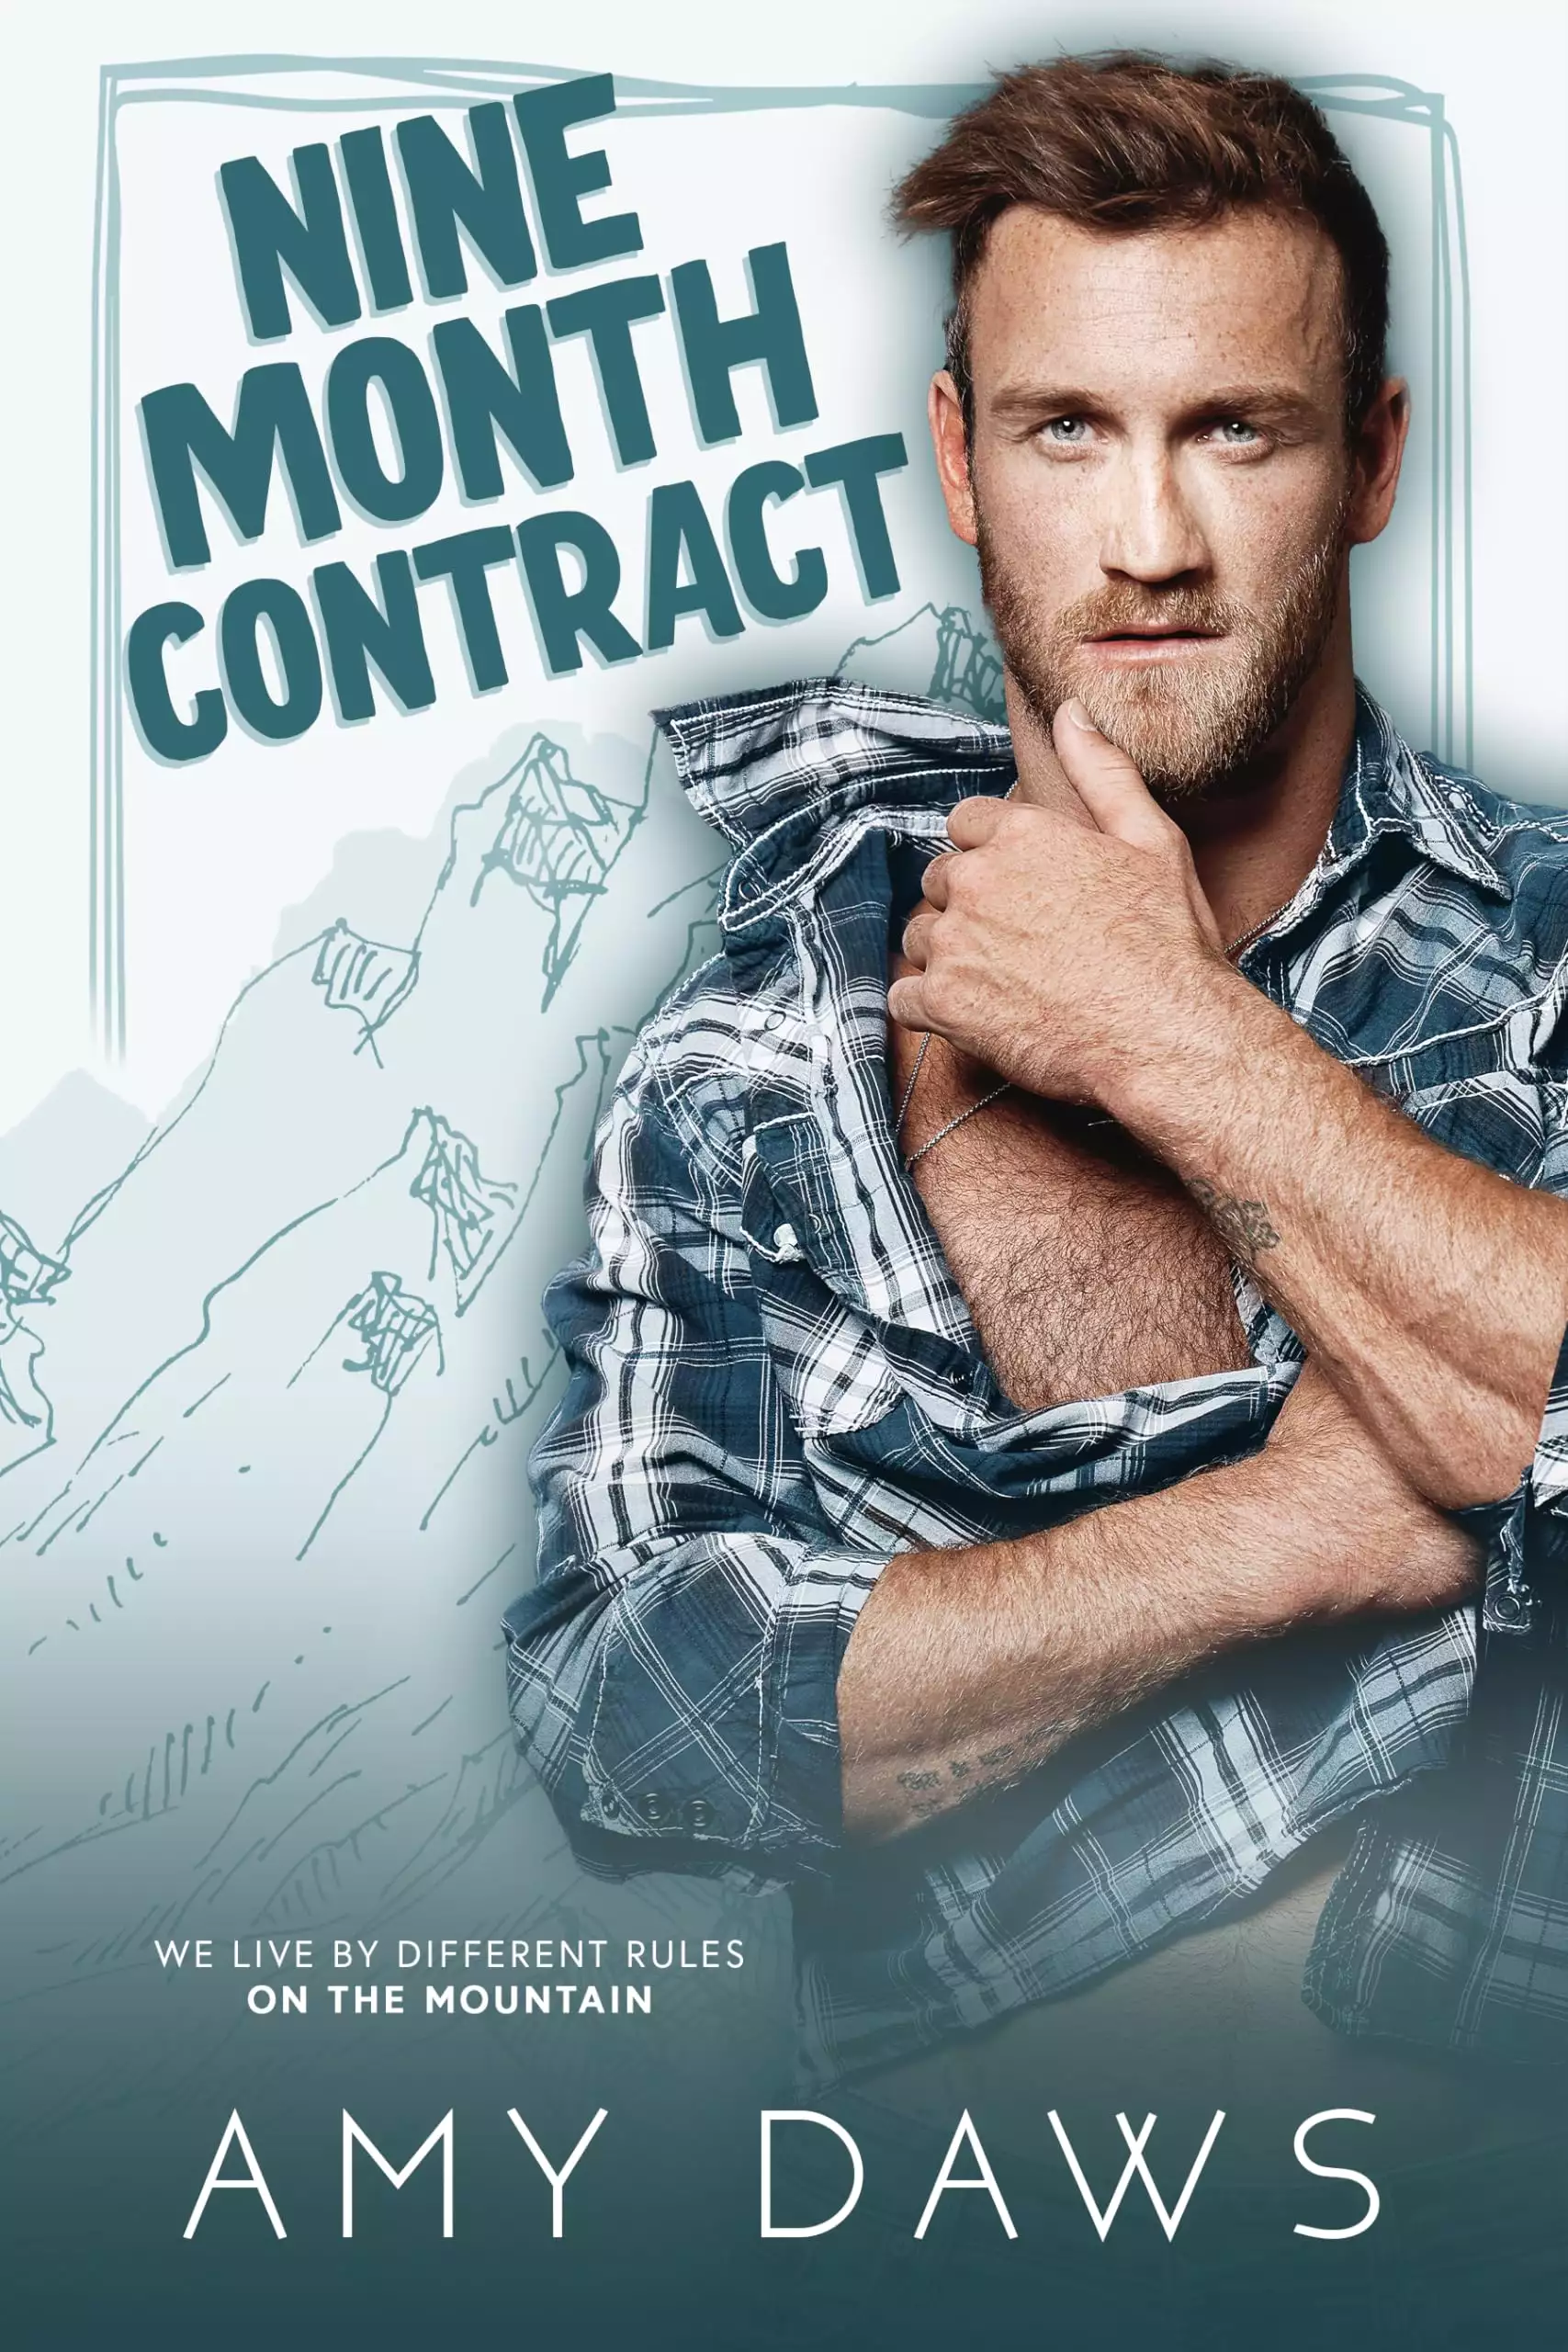 Nine Month Contract